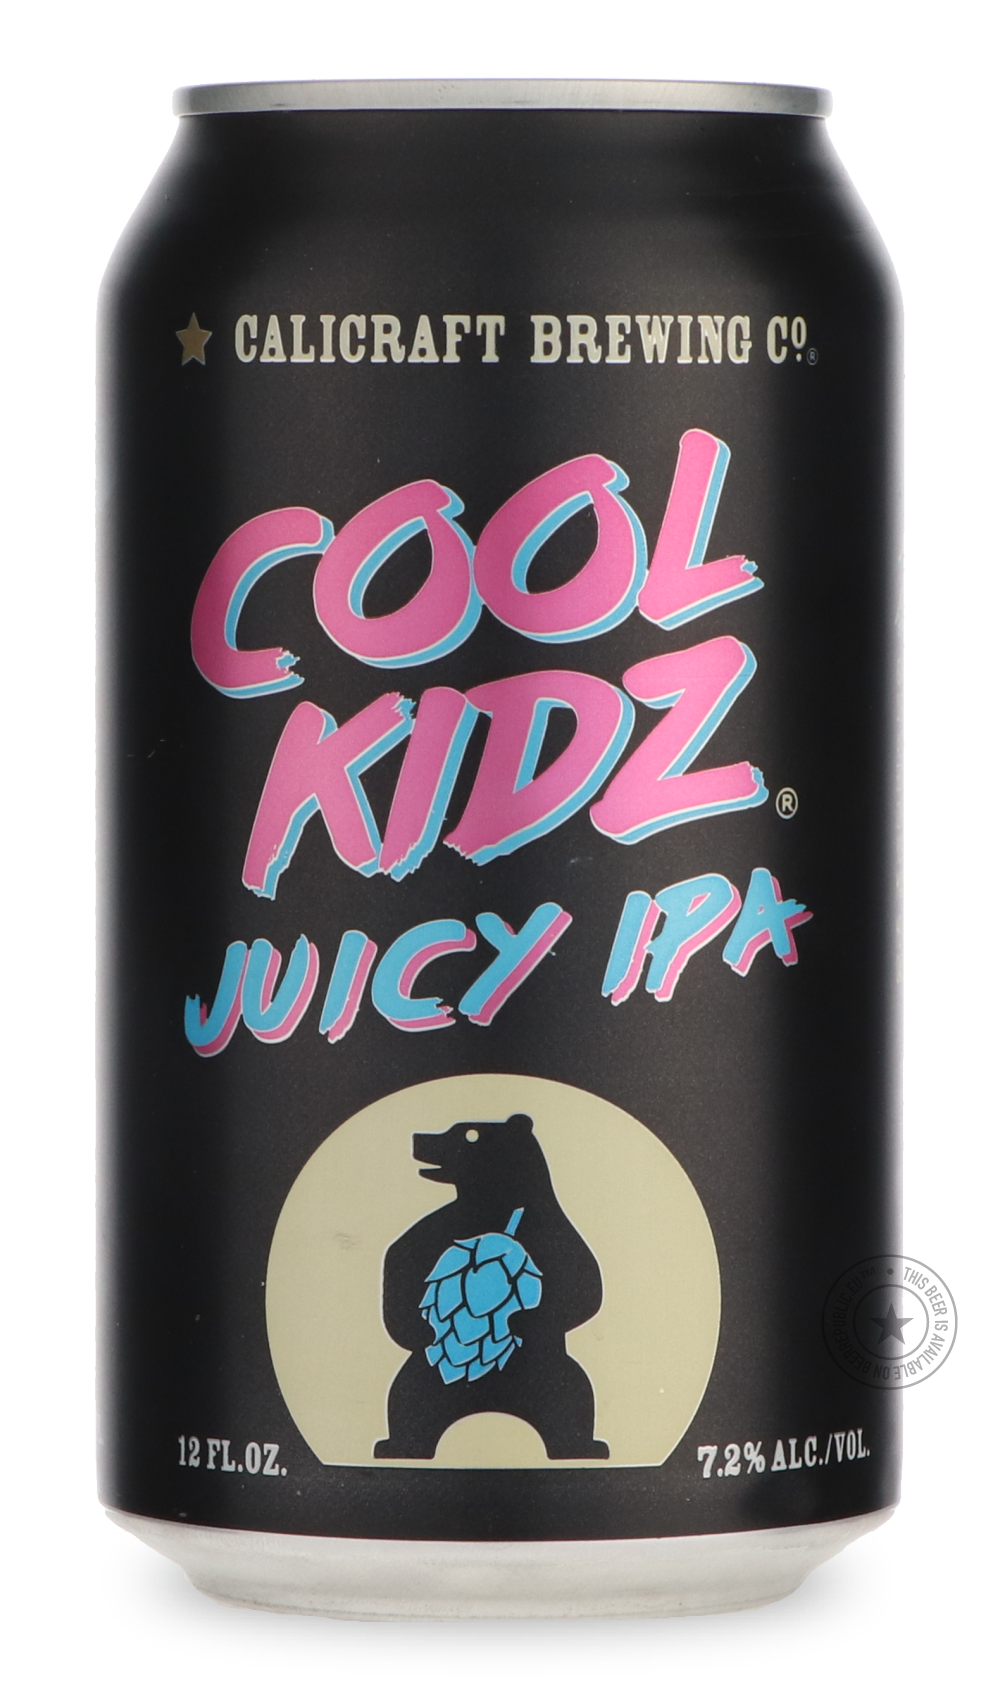 -Calicraft- Cool Kidz Juicy-IPA- Only @ Beer Republic - The best online beer store for American & Canadian craft beer - Buy beer online from the USA and Canada - Bier online kopen - Amerikaans bier kopen - Craft beer store - Craft beer kopen - Amerikanisch bier kaufen - Bier online kaufen - Acheter biere online - IPA - Stout - Porter - New England IPA - Hazy IPA - Imperial Stout - Barrel Aged - Barrel Aged Imperial Stout - Brown - Dark beer - Blond - Blonde - Pilsner - Lager - Wheat - Weizen - Amber - Barle